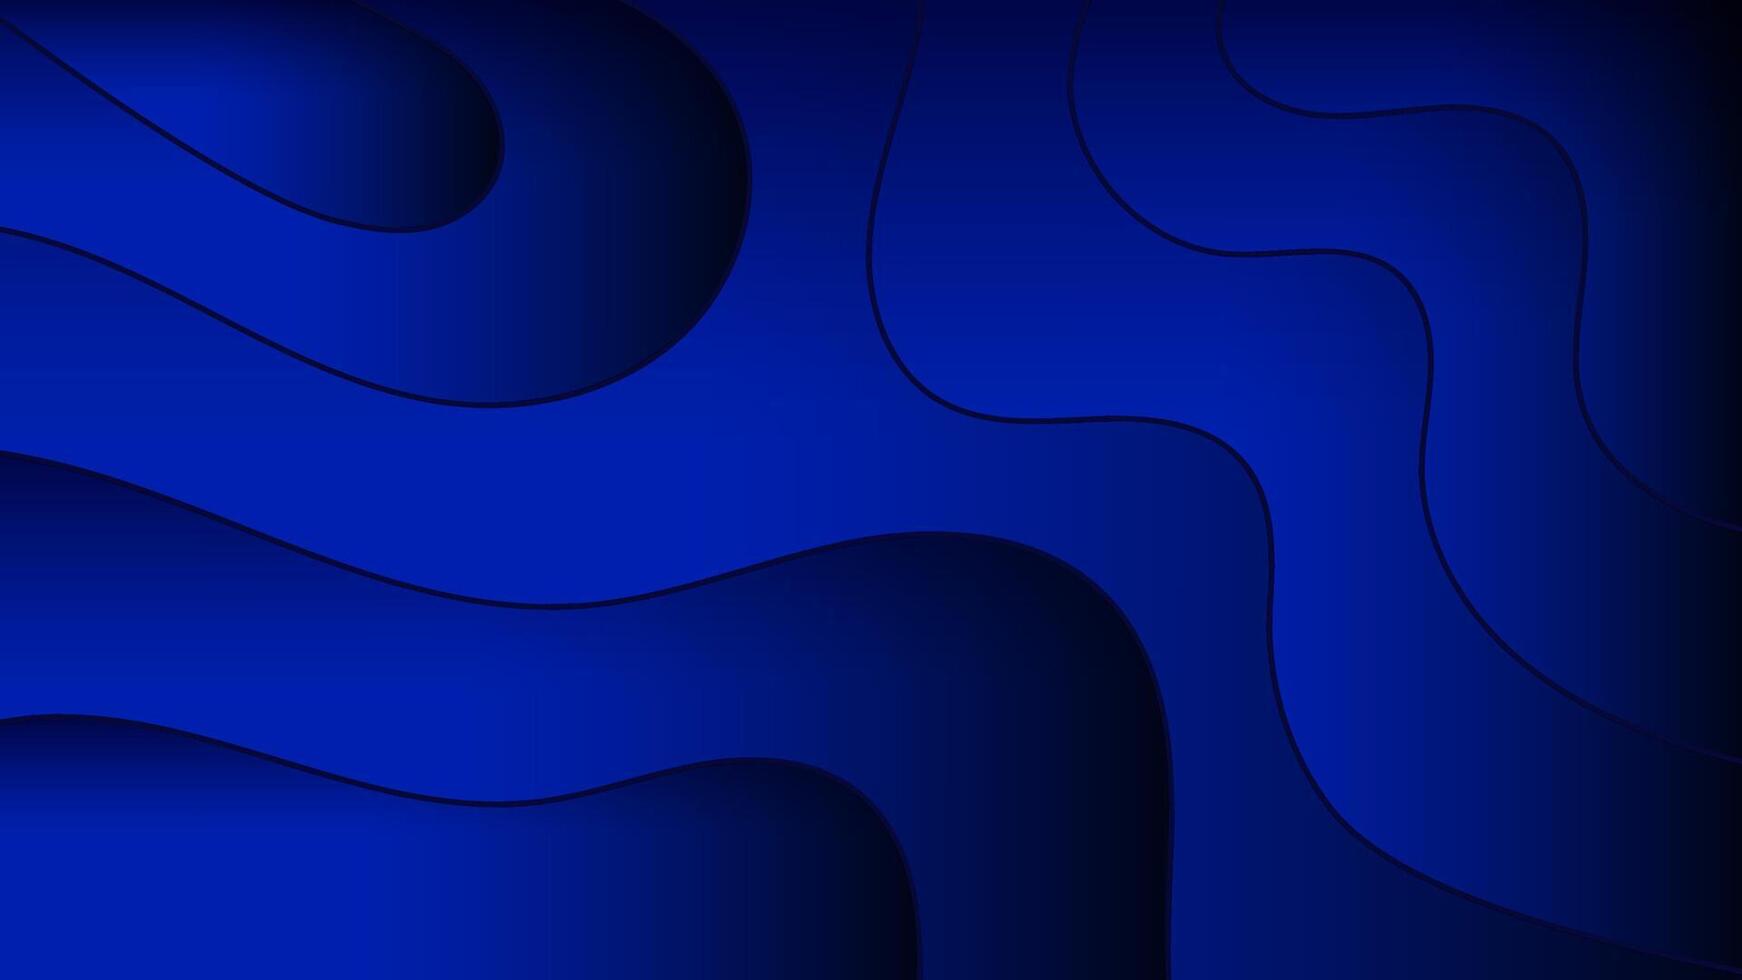 Abstract dark blue color with modern design wave lines background illustration. vector